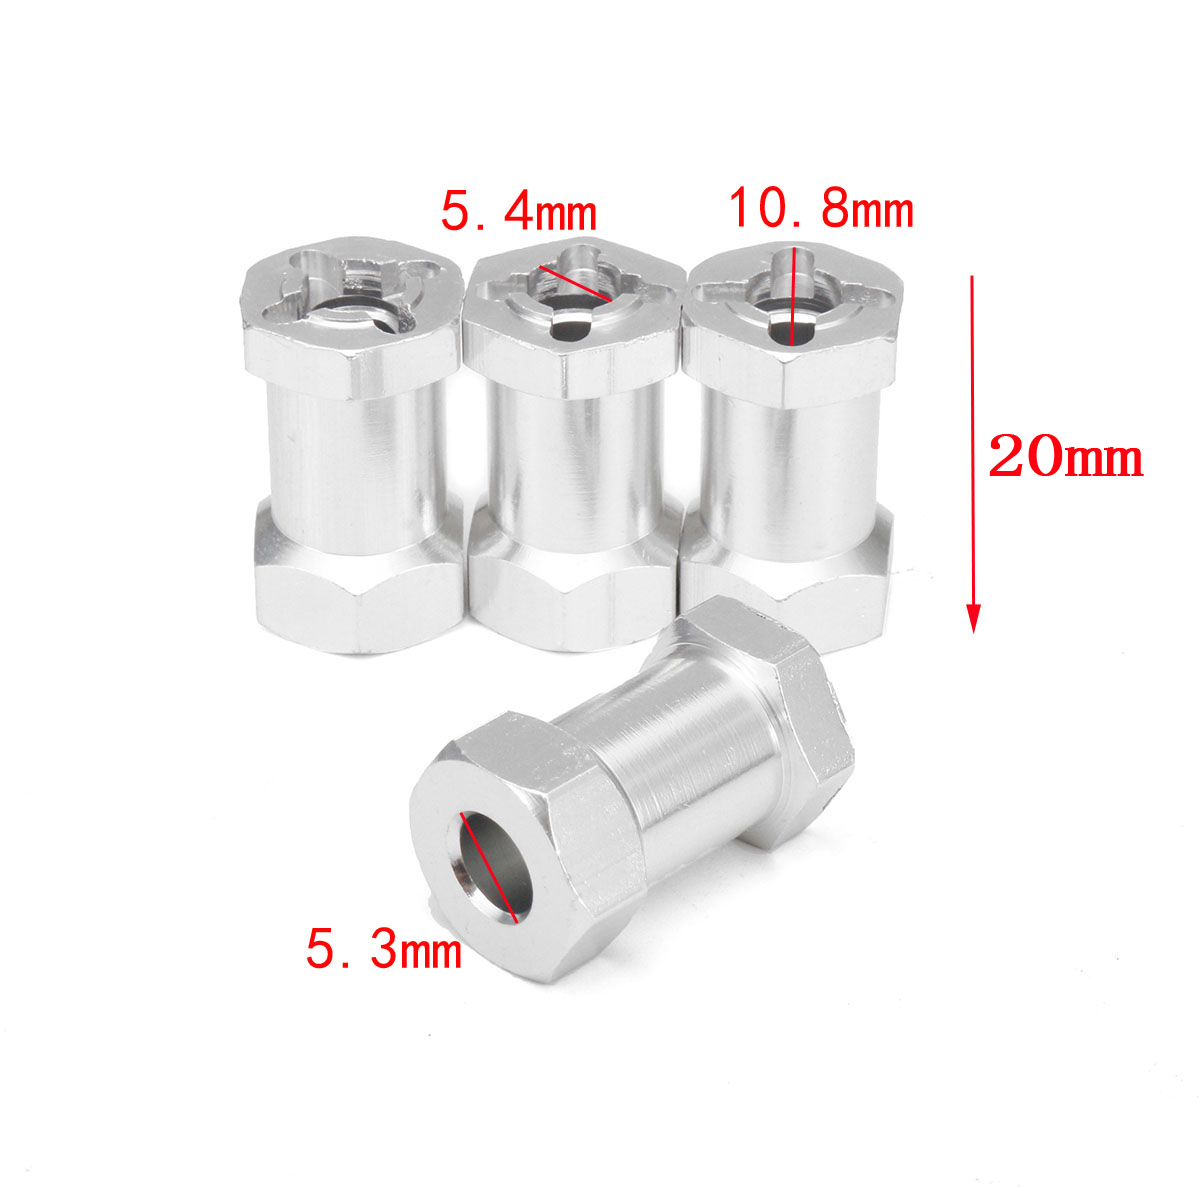 110-12mm-Extension-Hex-Adaptor-Connector-Kit-For-SCX10-WRAITH-RC-Car-Crawler-Parts-1182669